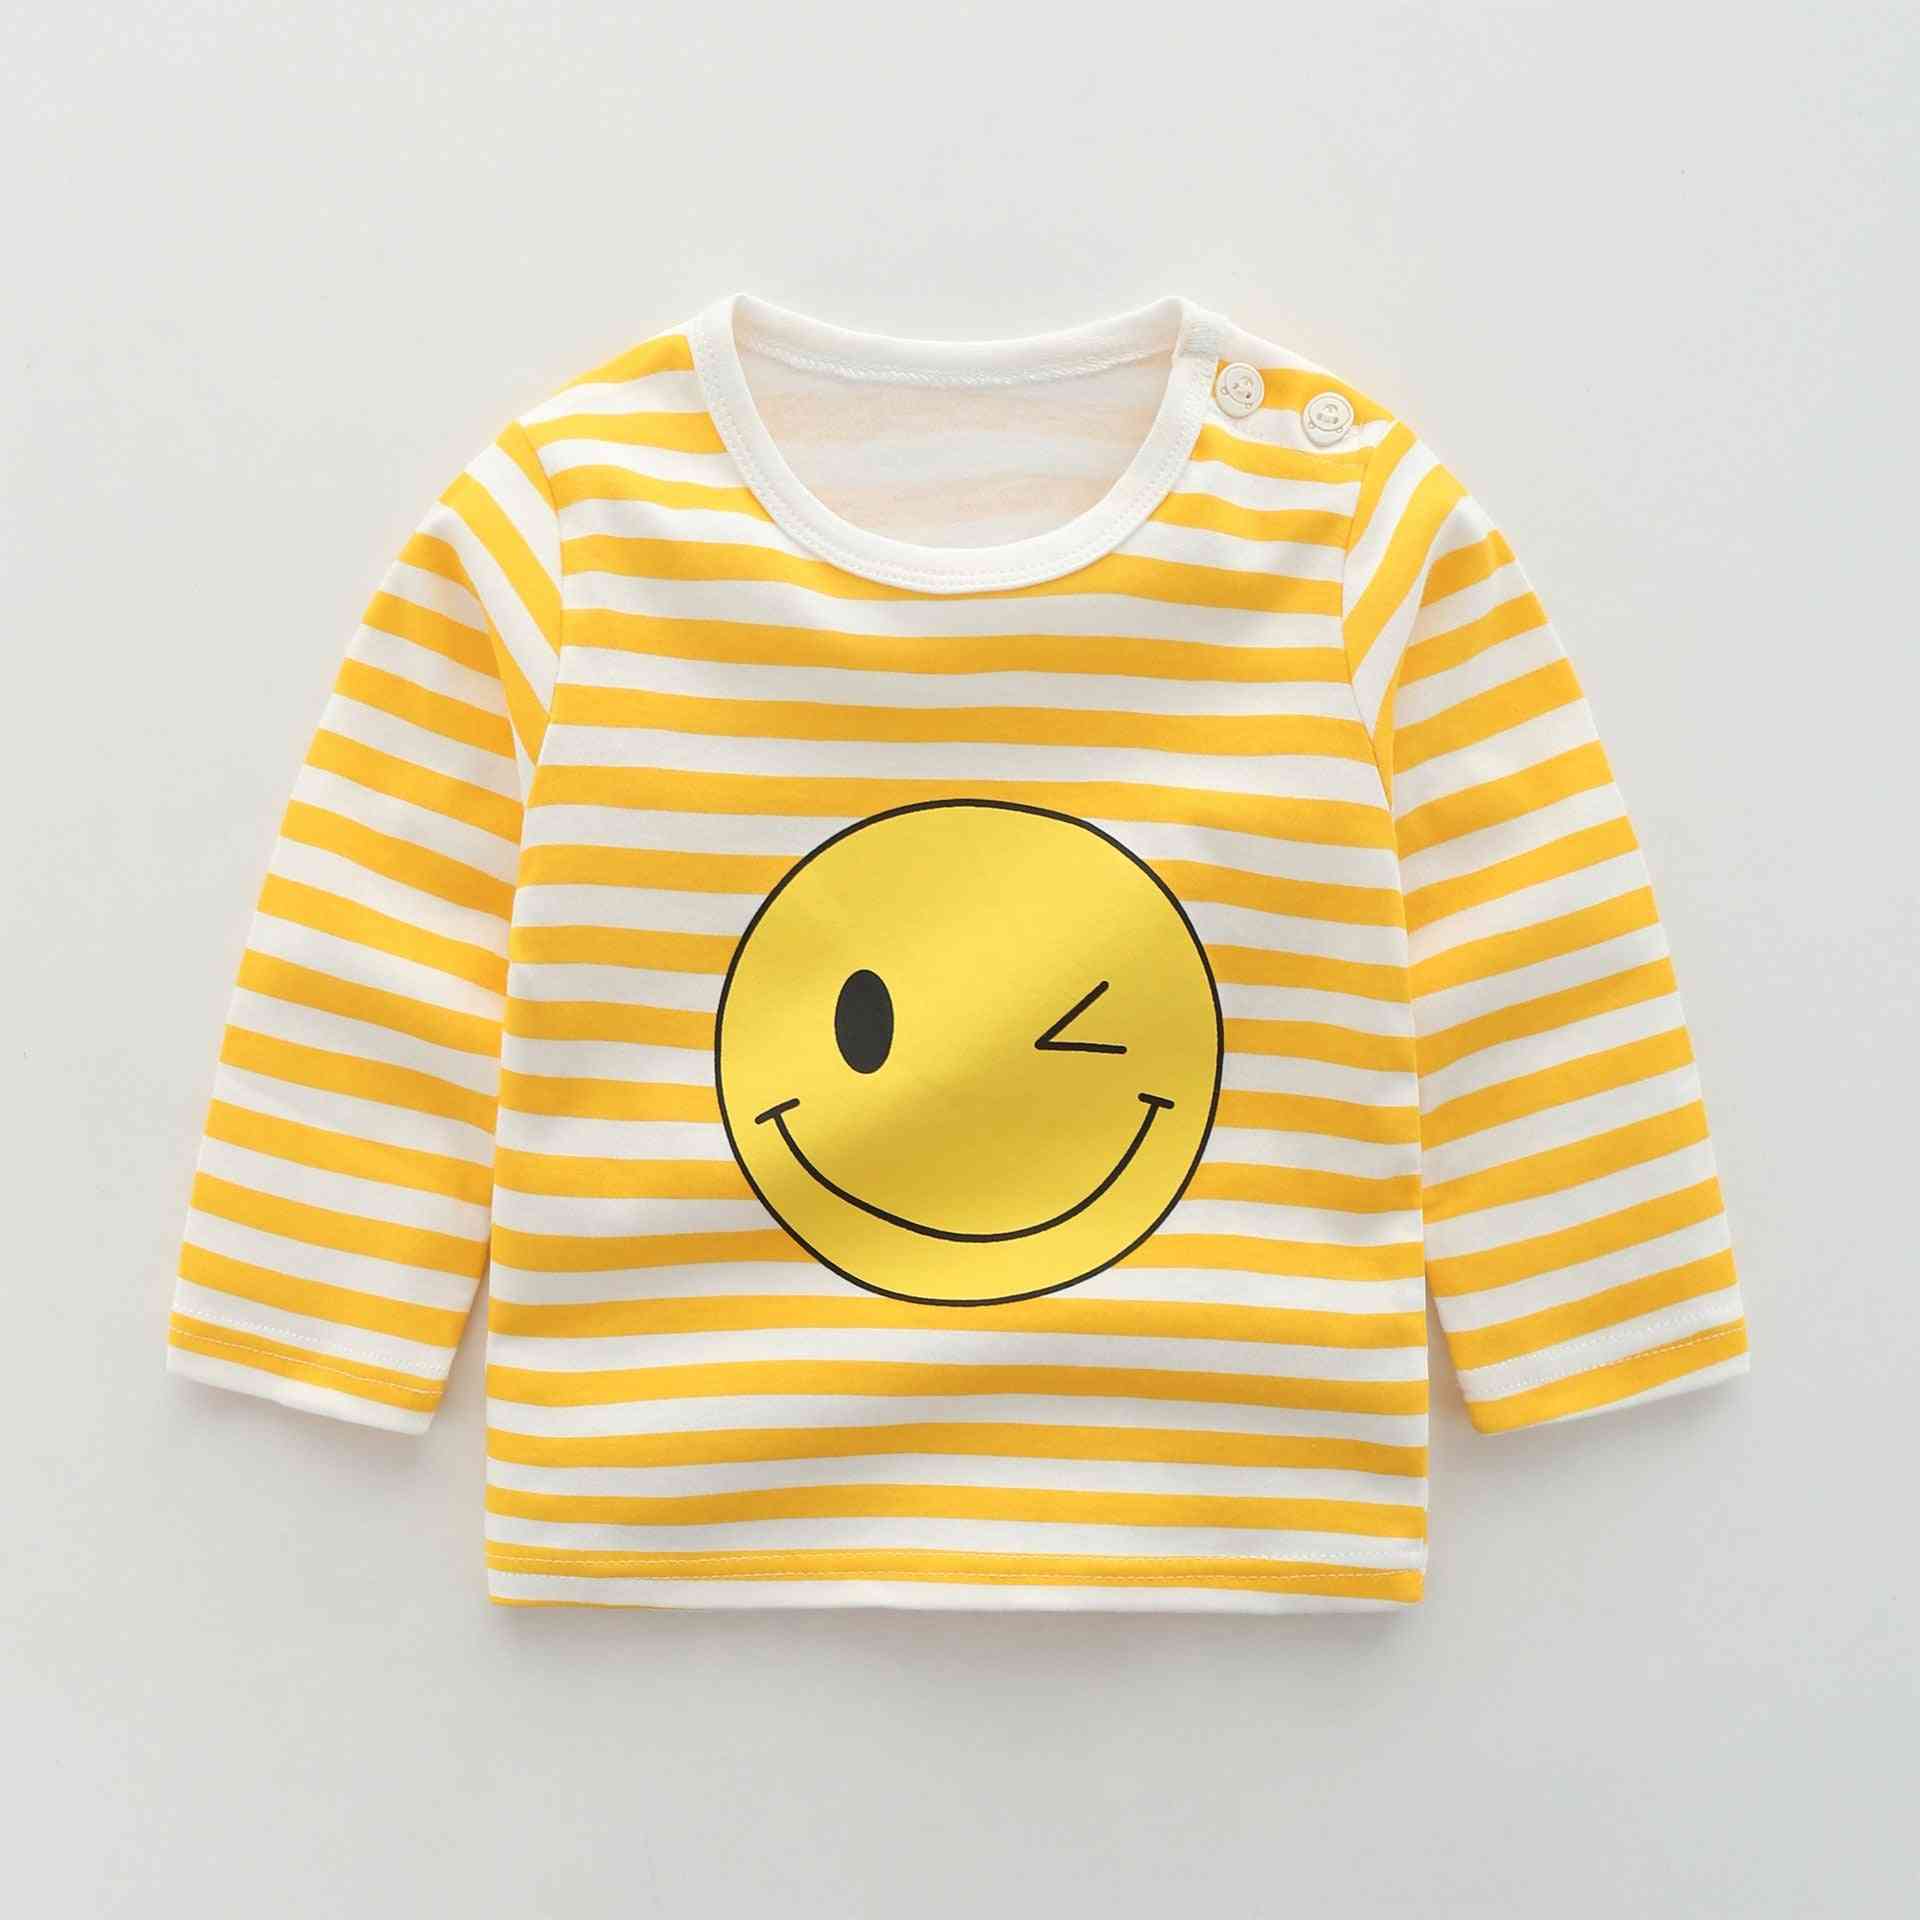 Cute Cartoon Printed, Cotton And Long Sleeve Casual Tops